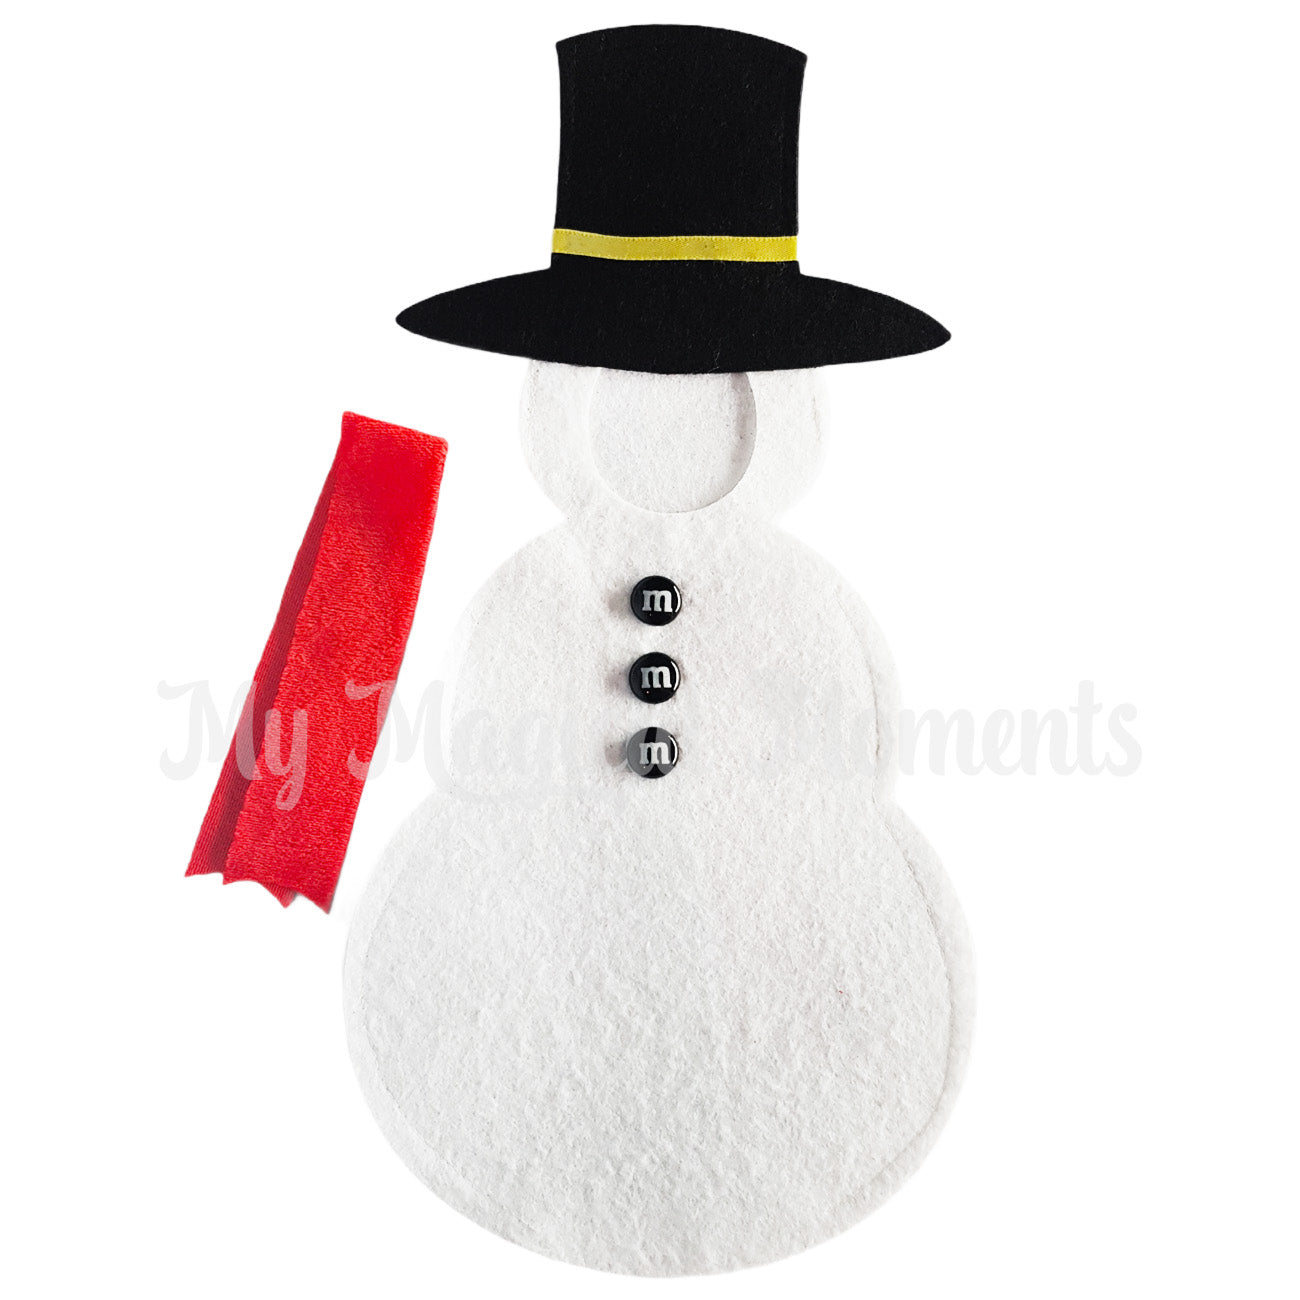 Snowman elf costume with red scarf and black hat